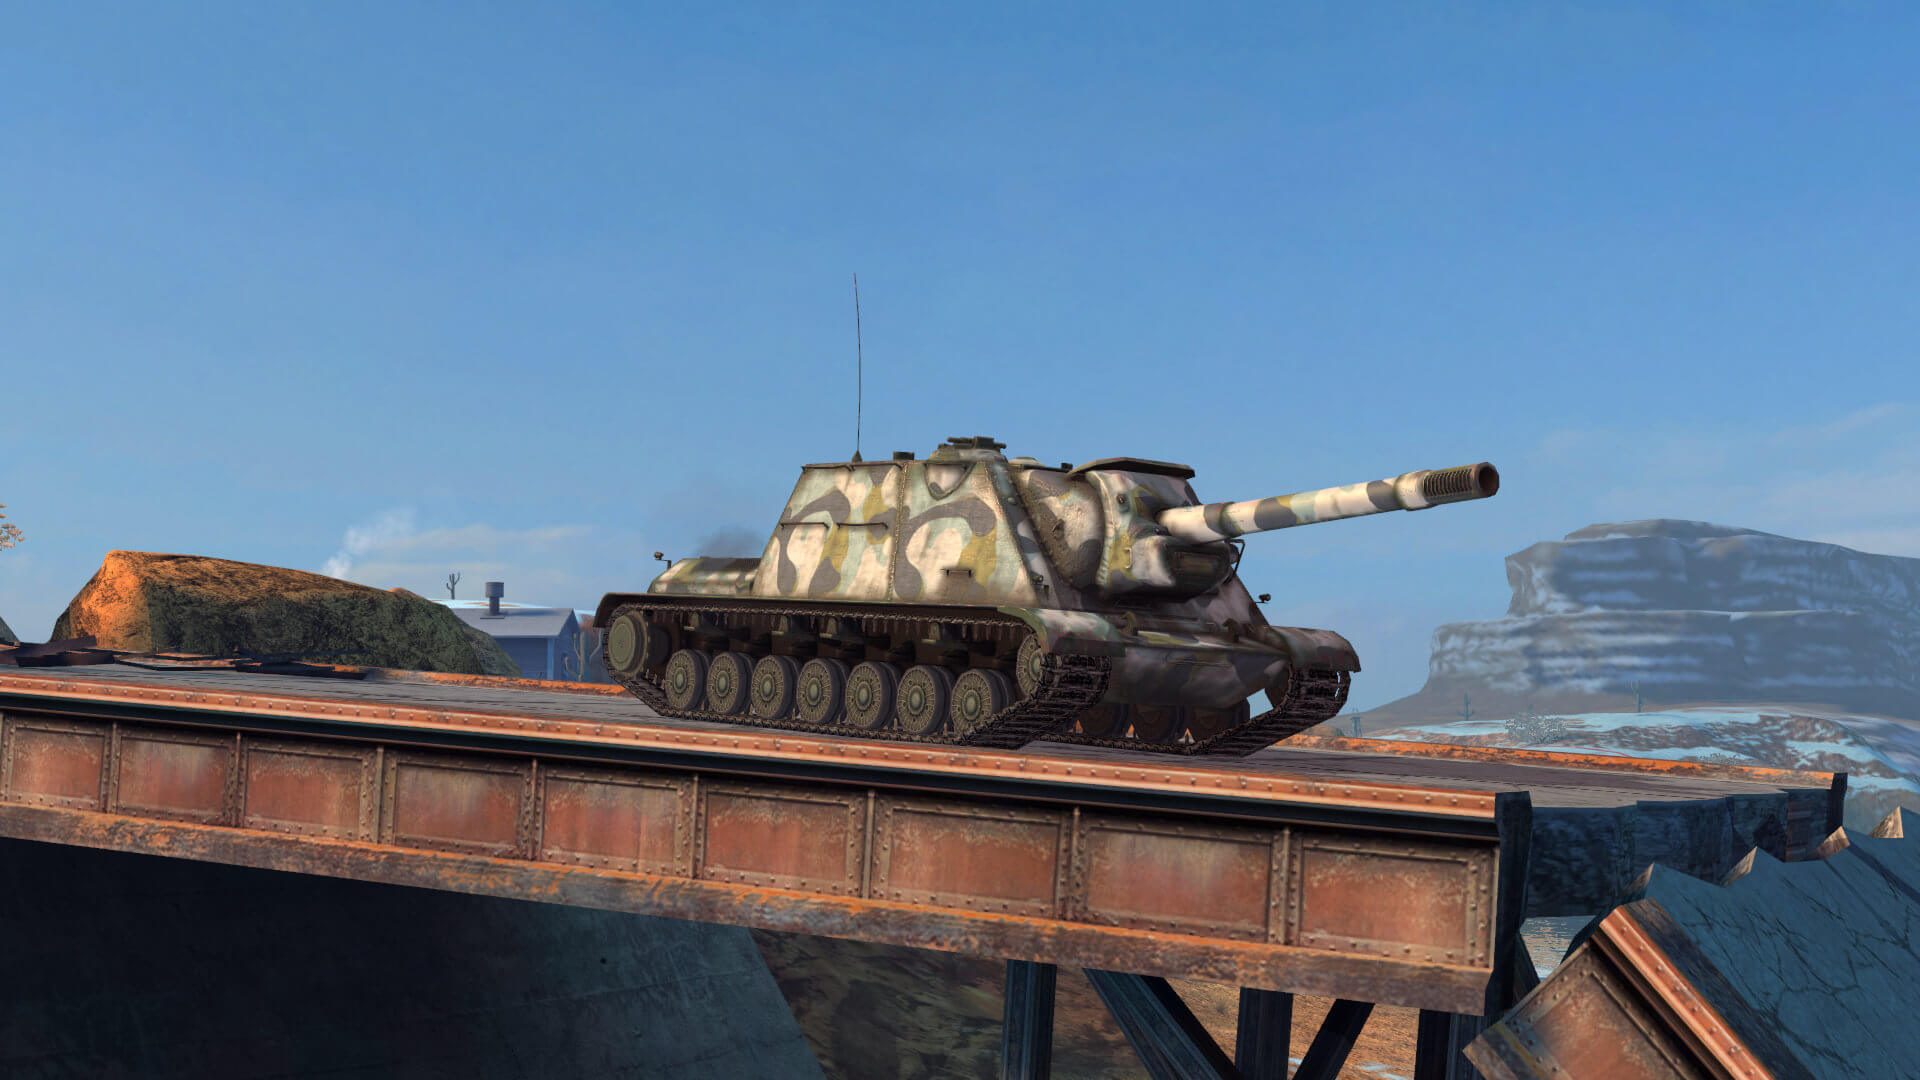 Feb 21 2019 Update 5 8 World Of Tanks Blitz Tog Ii Just Two Words Mad Games From March 15 The Mad Modifications Will Be Back For A Week But This Time They Will Be Available On A Greater Number Of Maps Which Means Battles In This Mode Will